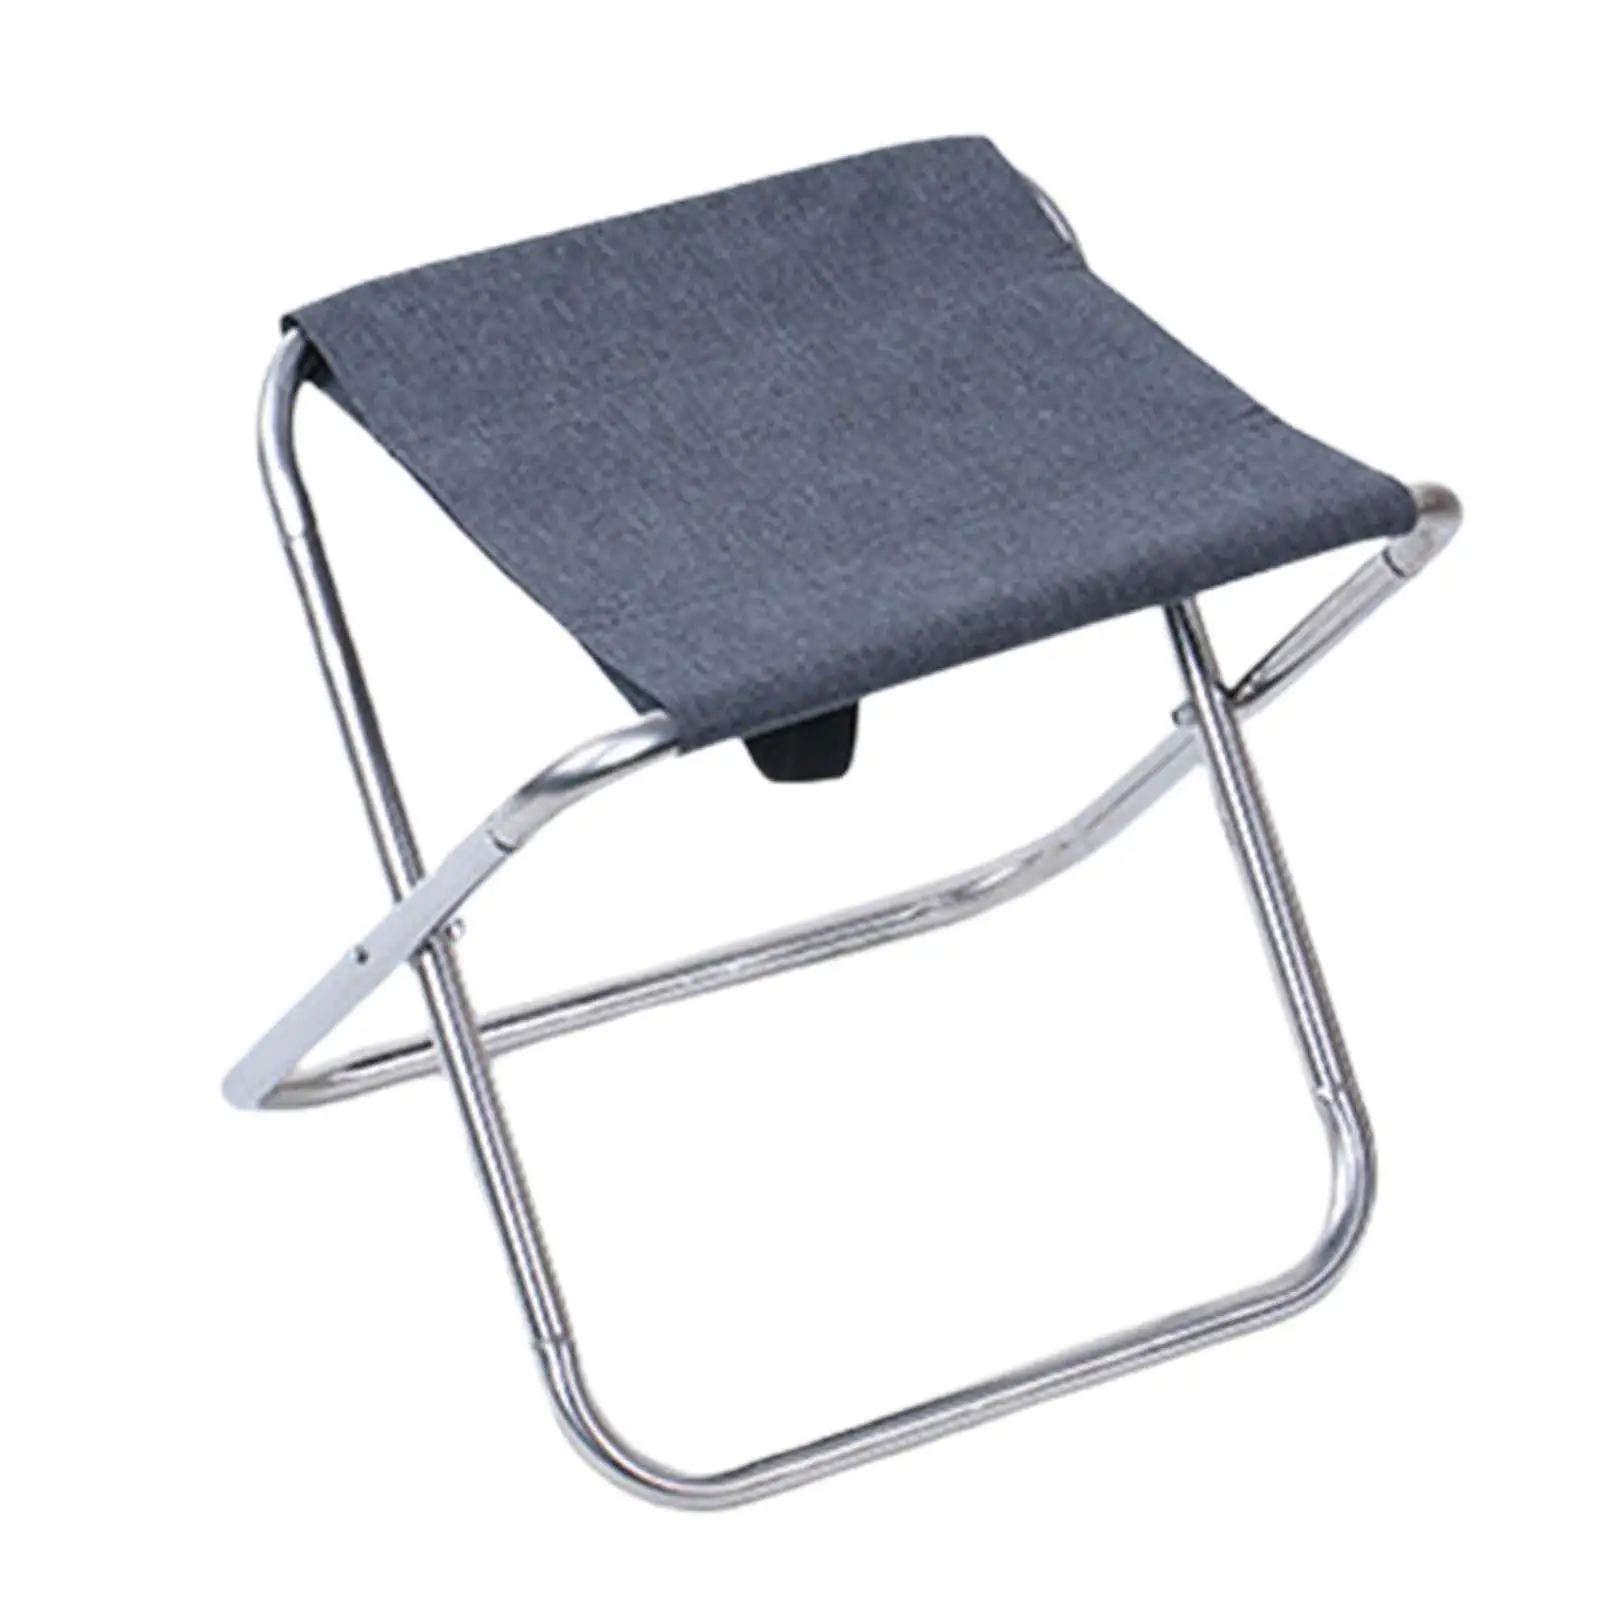 Folding Stool Camping Ultralight Camp Stool Easy to Carry Small Outdoor Fishing Chair for Patio Barbecue Lawn Sports Backpacking